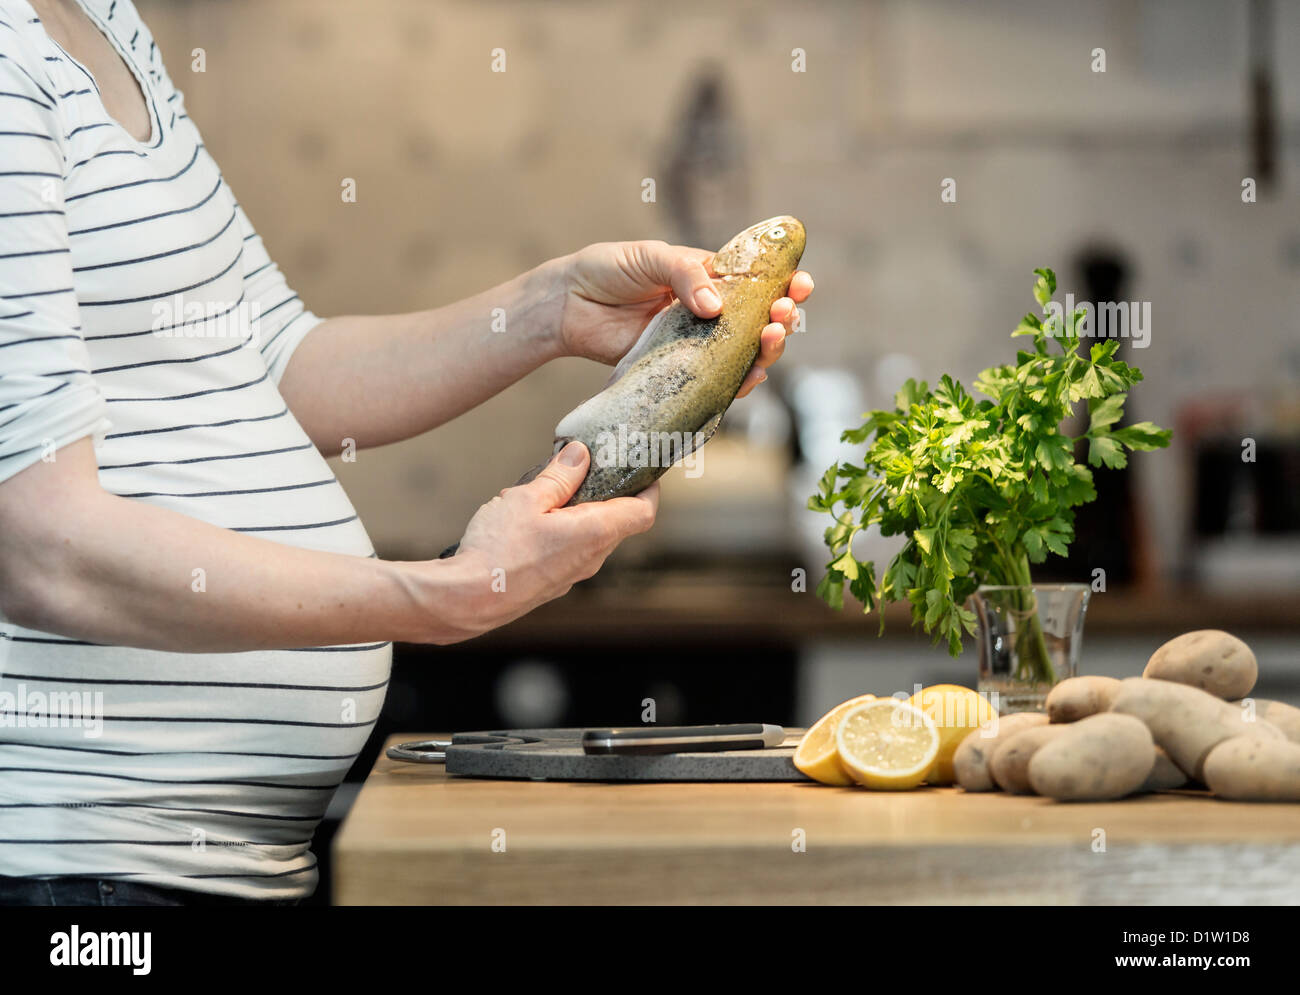 Pregnant woman, 35 years old, cooking fresh trout in a kitchen. Stock Photo